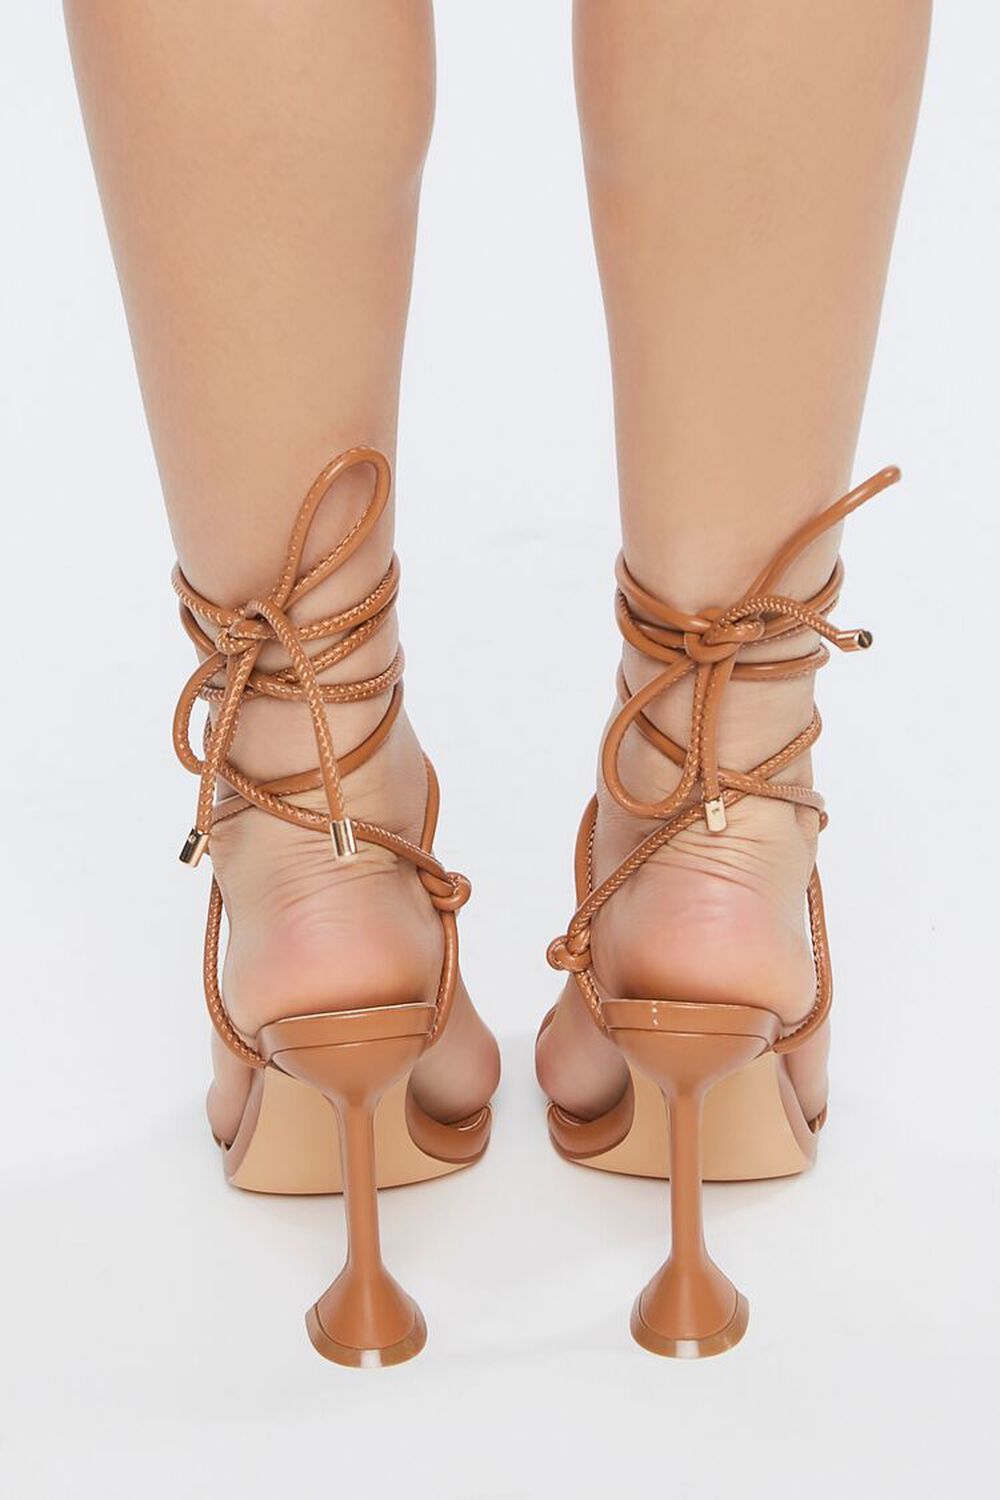 TAN Knotted Strappy Open-Toe Heels, image 3